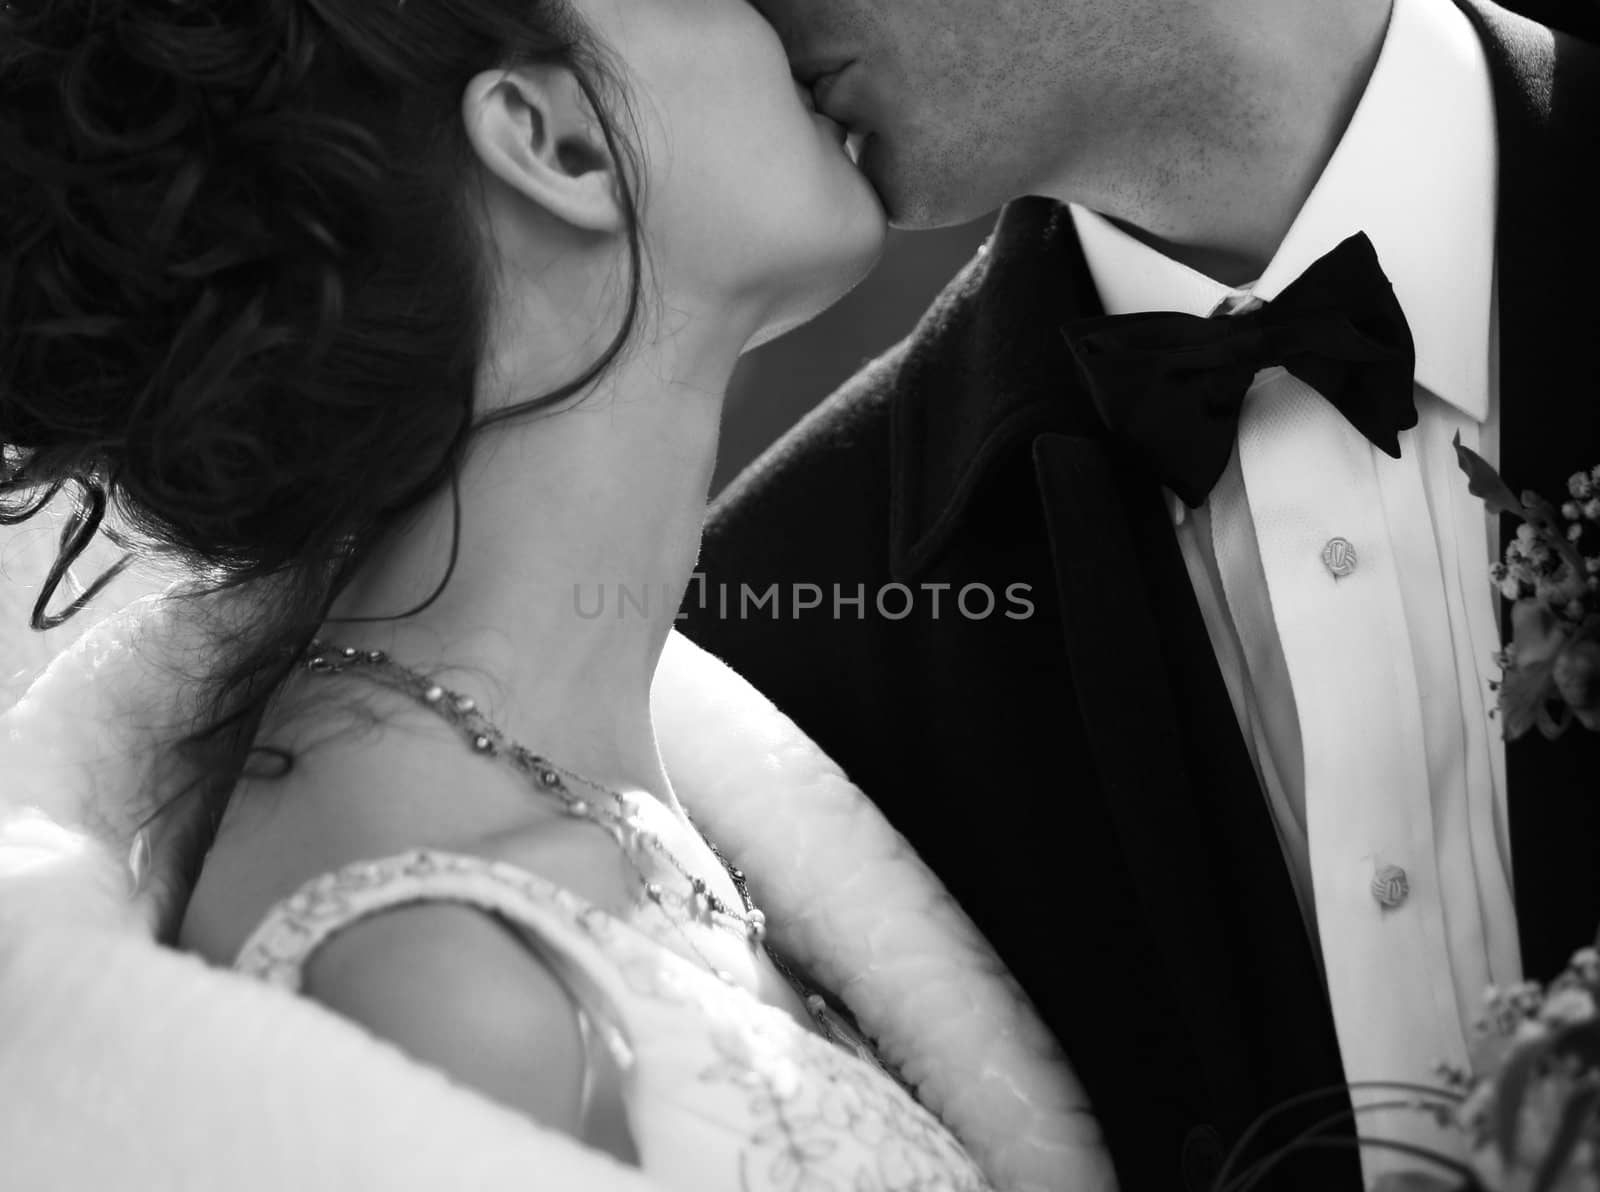 The groom and the bride kiss. b/w